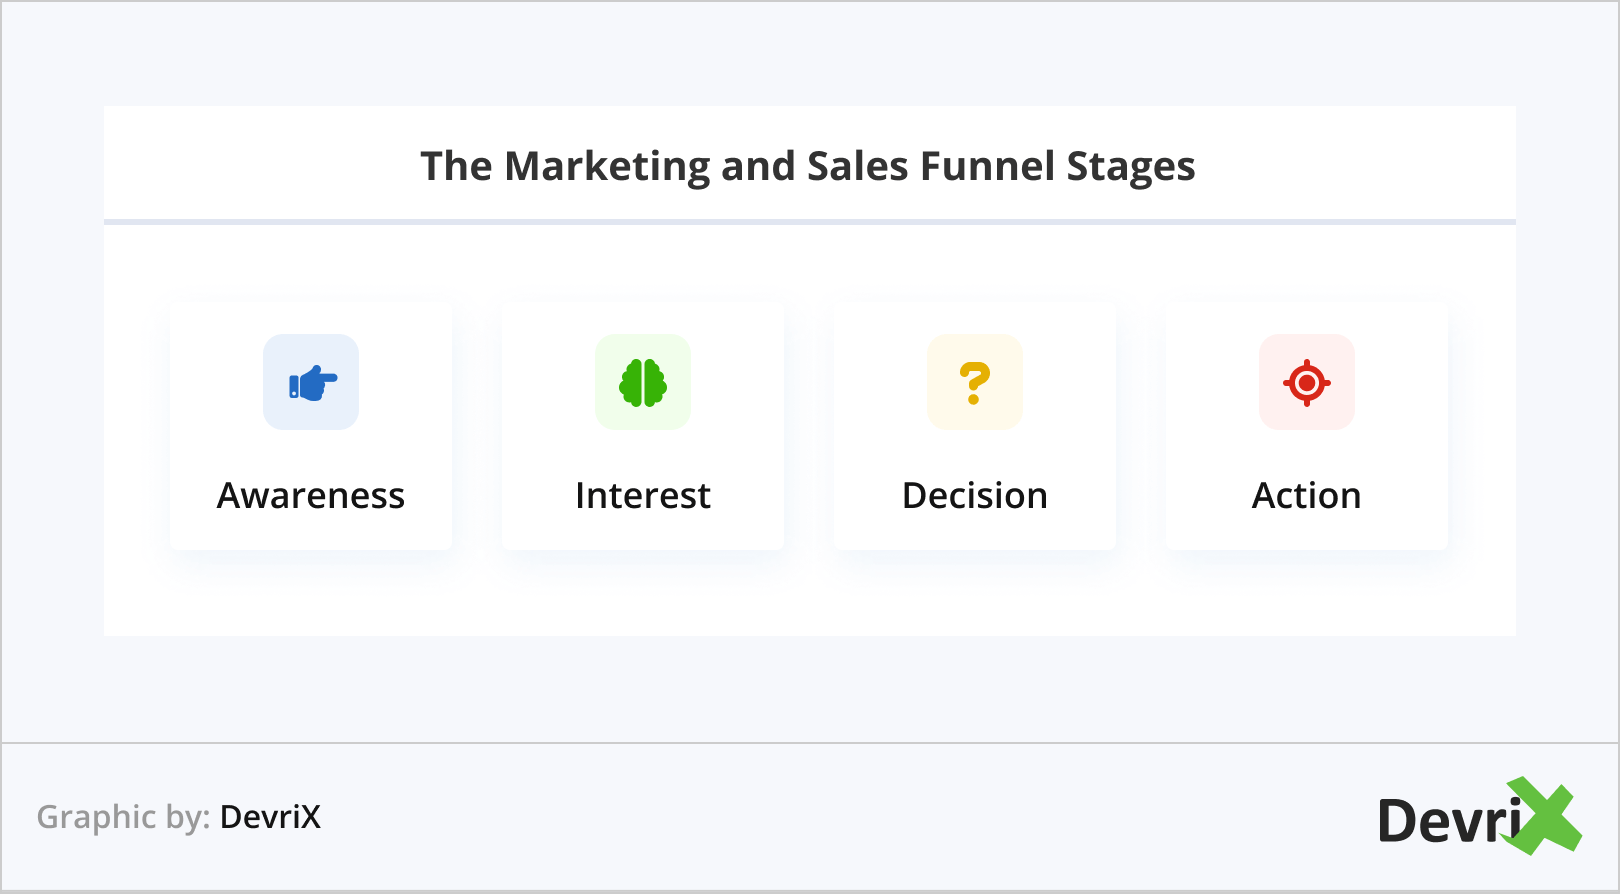 The Marketing and Sales Funnel Stages